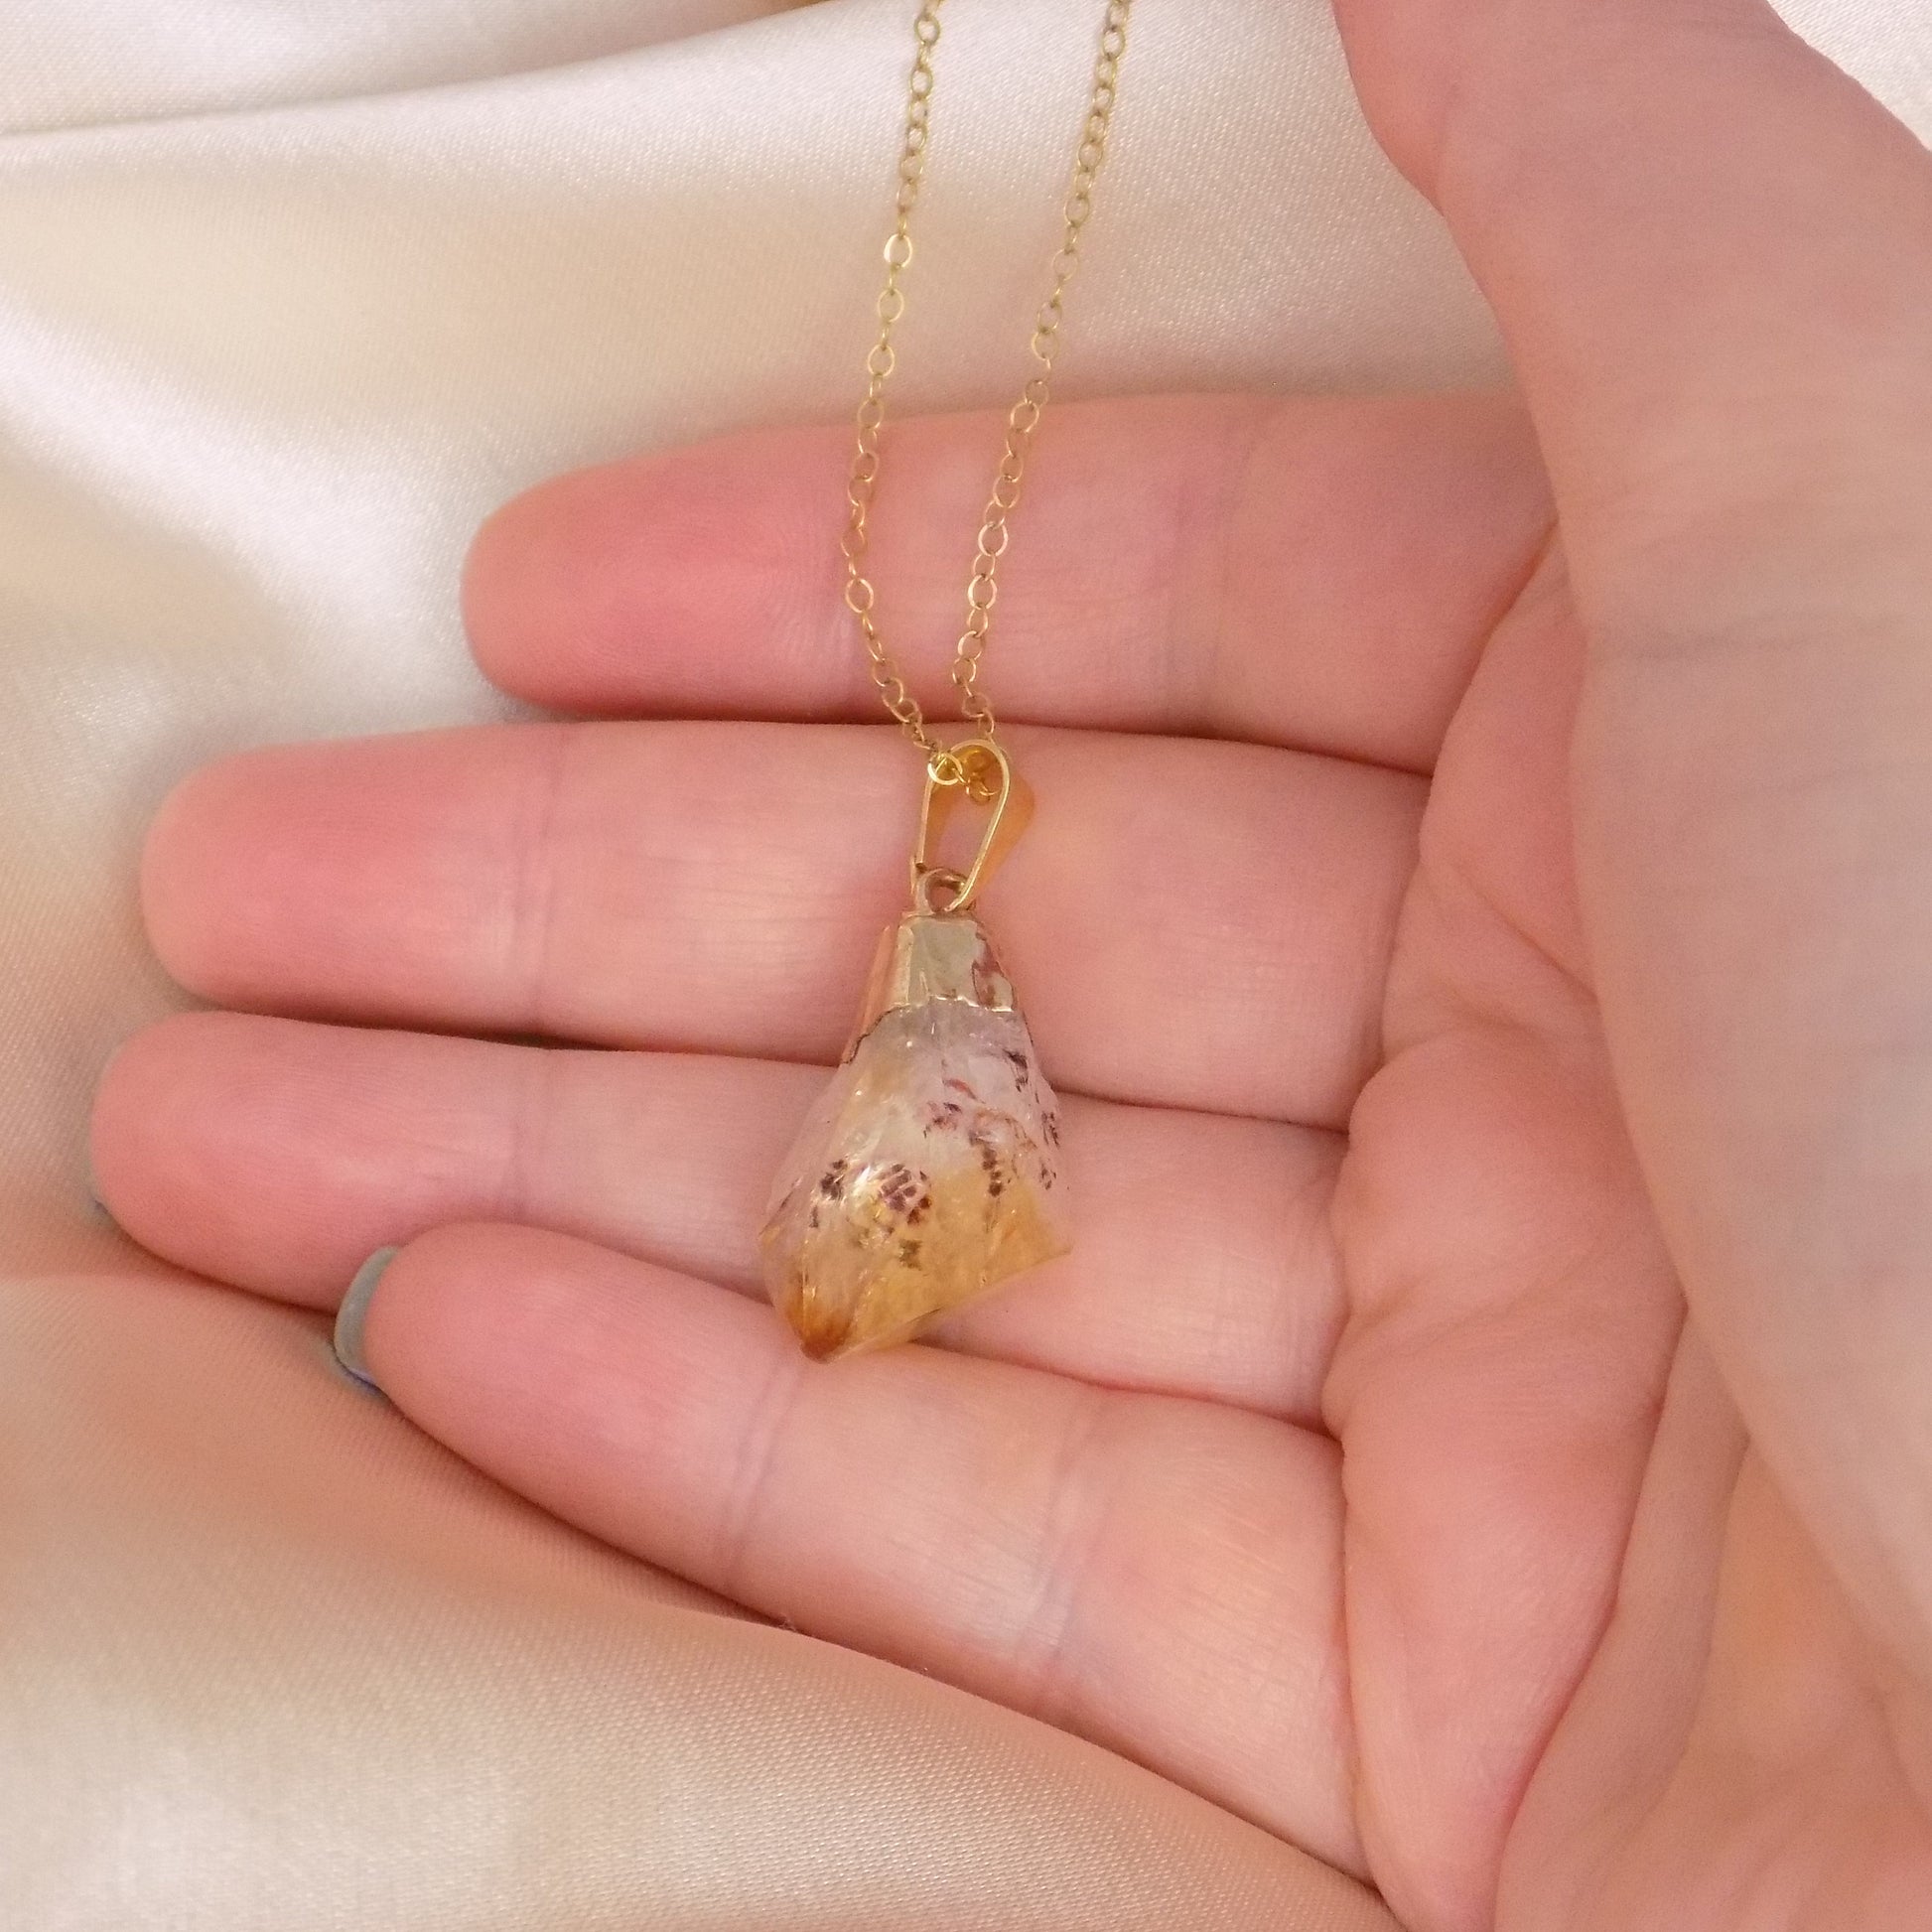 Yellow Citrine Crystal Necklace Gold - November Birthstone Jewelry - Christmas Gift For Her - G15-252